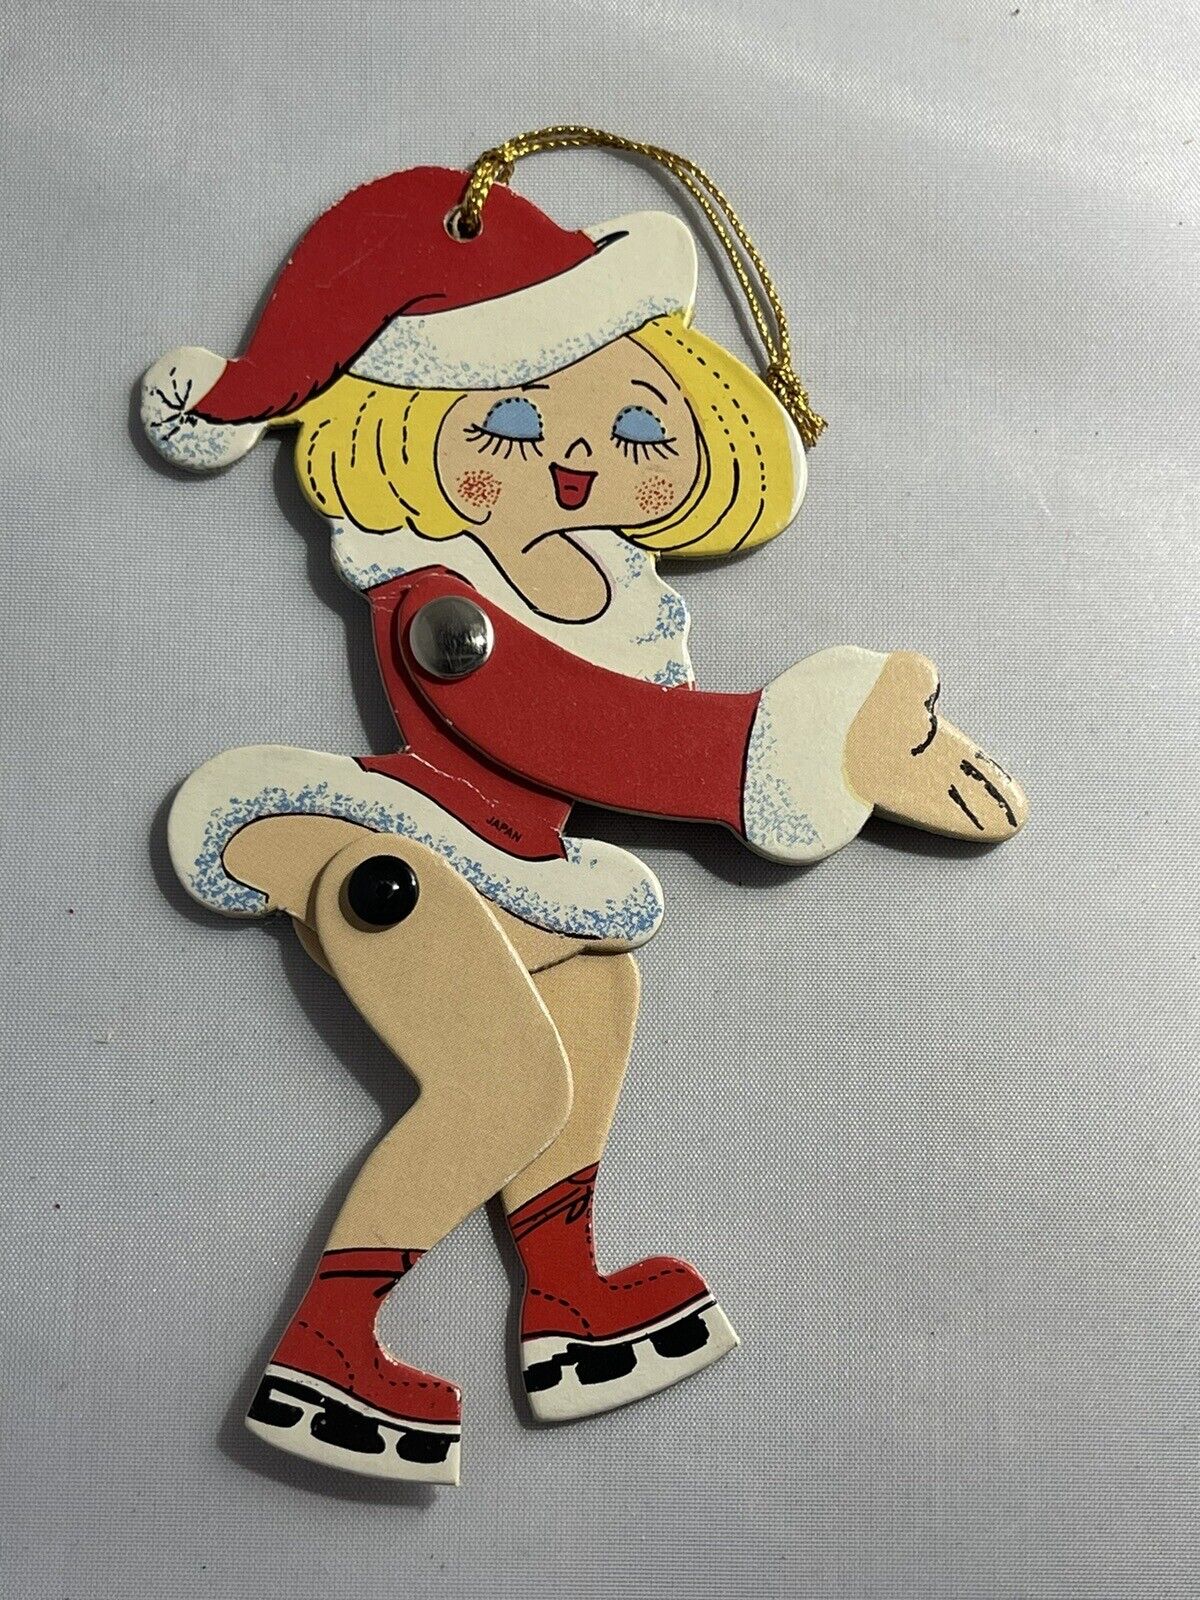 1950’s Rare Max Fleischer’s Jointed Pinup Style Blonde Bombshell Woman EB-330